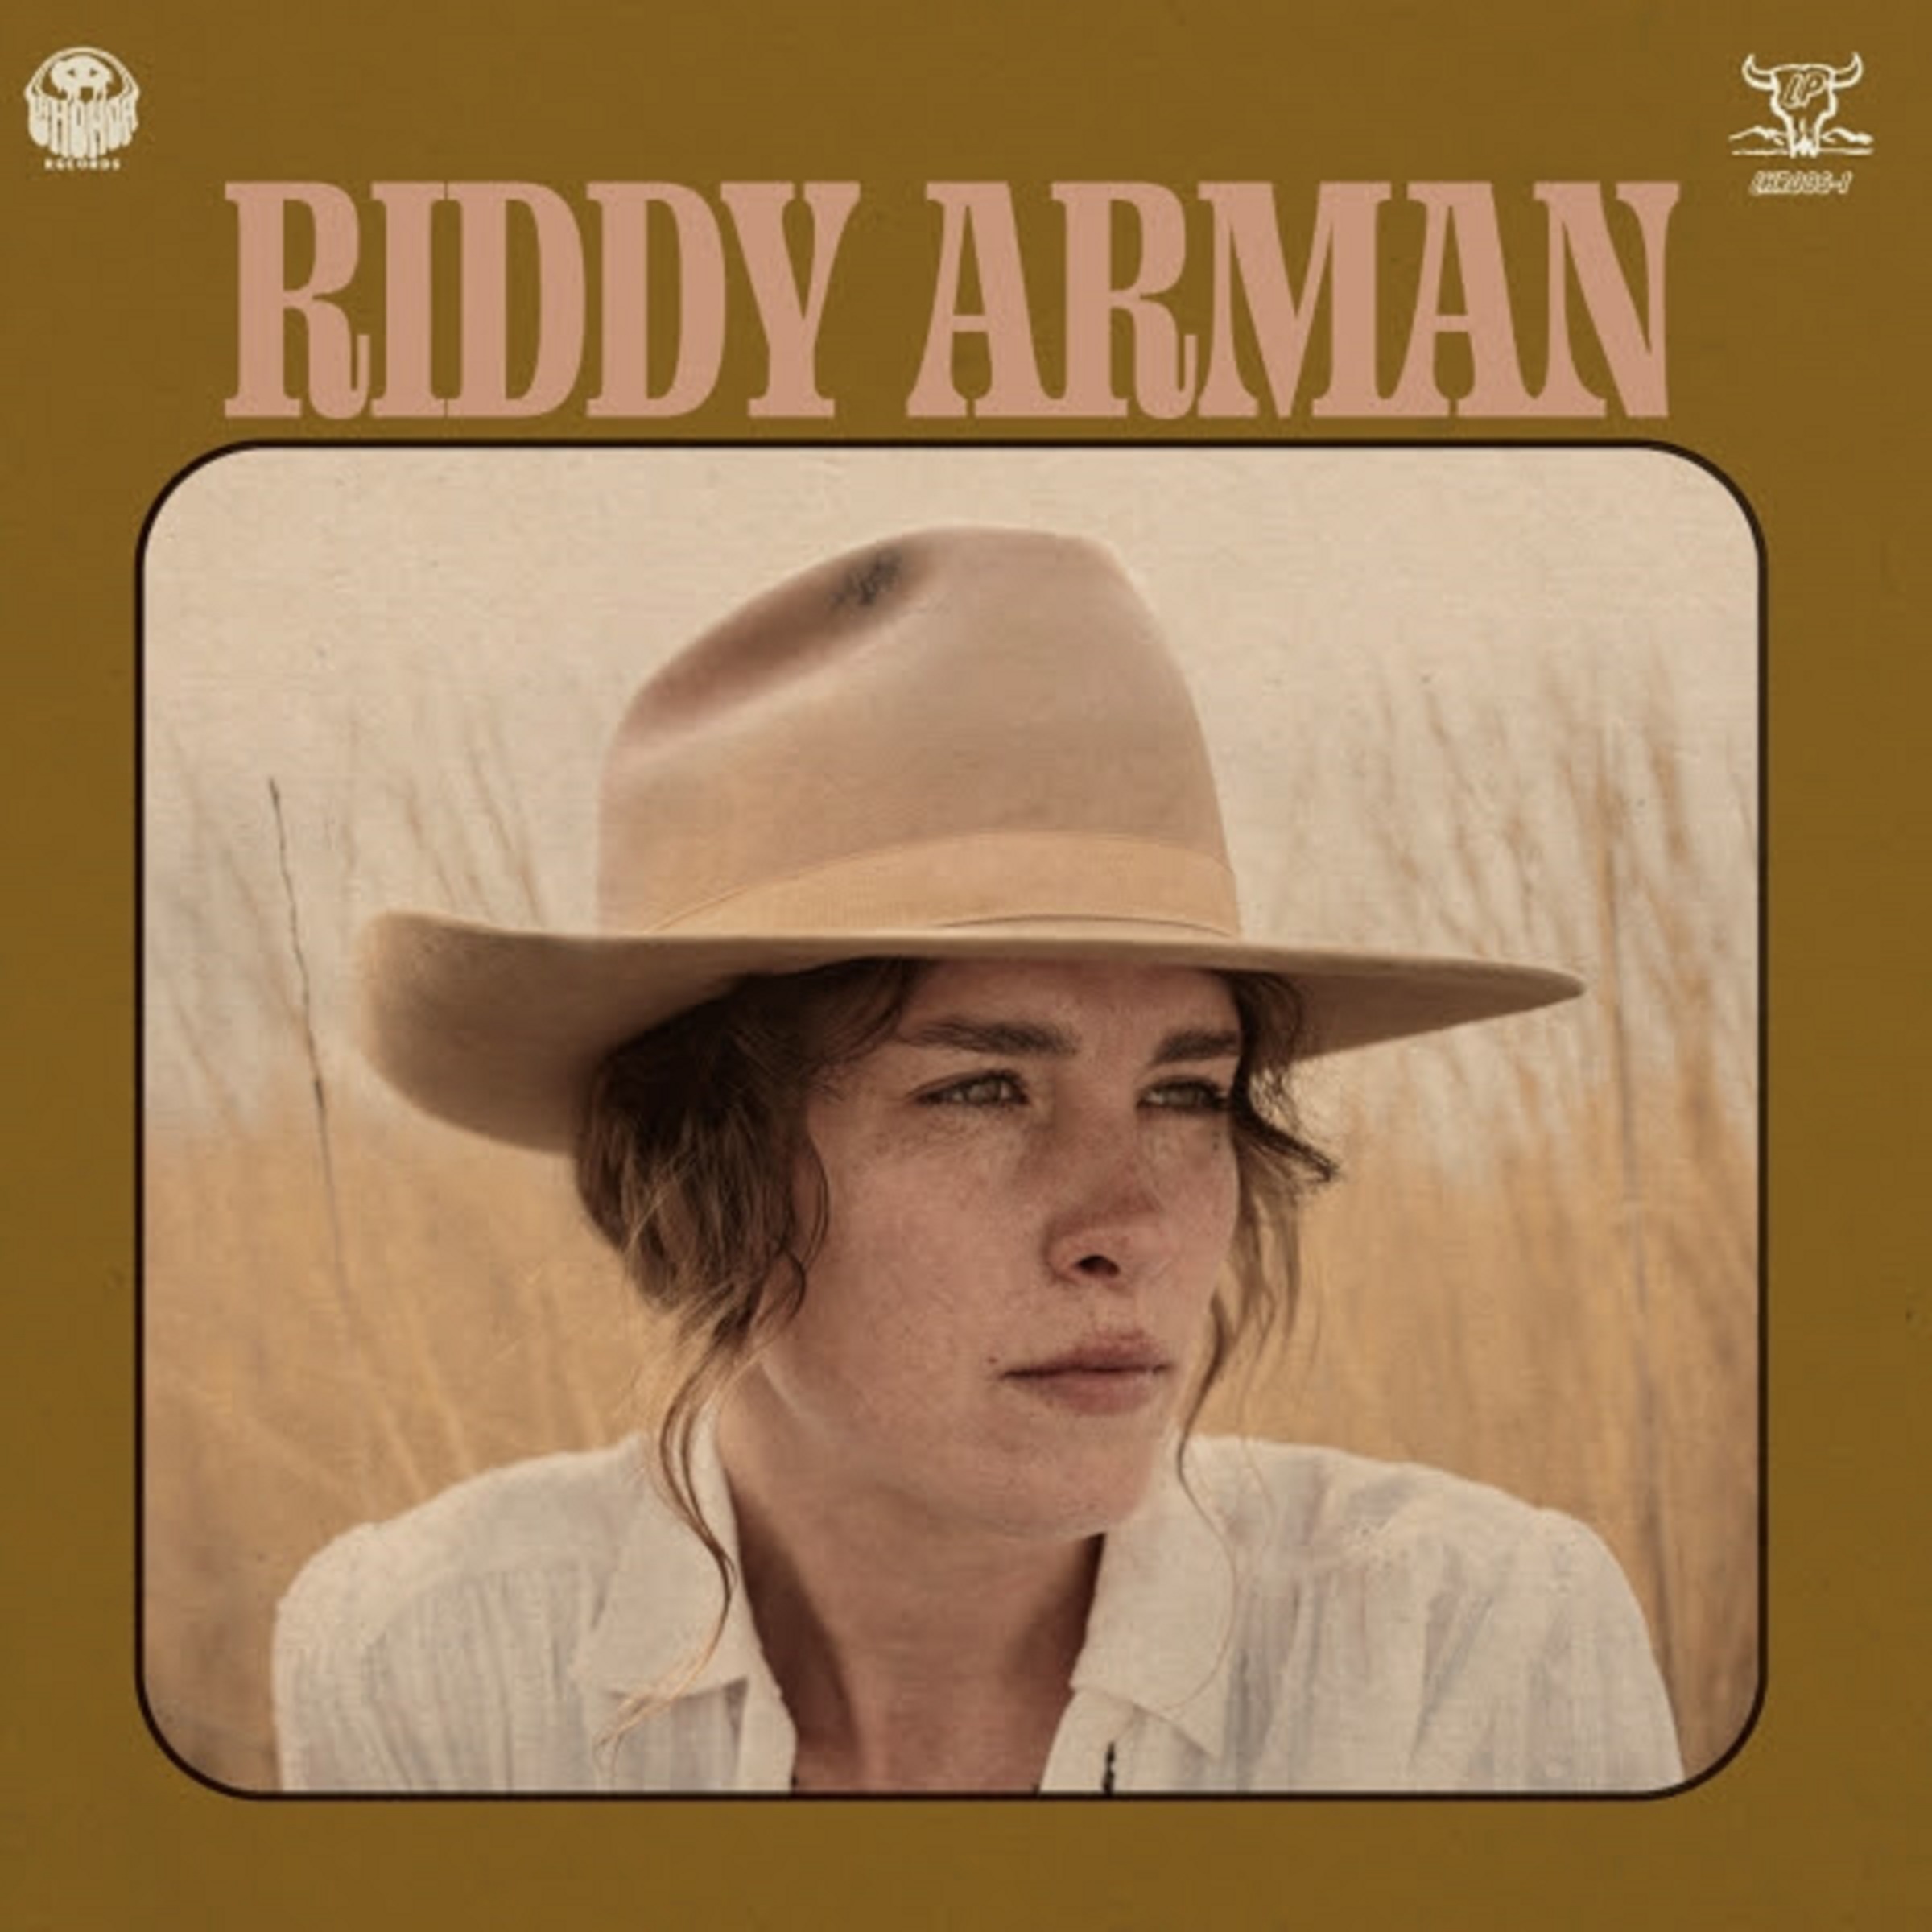 Riddy Arman Shares "Barbed Wire"